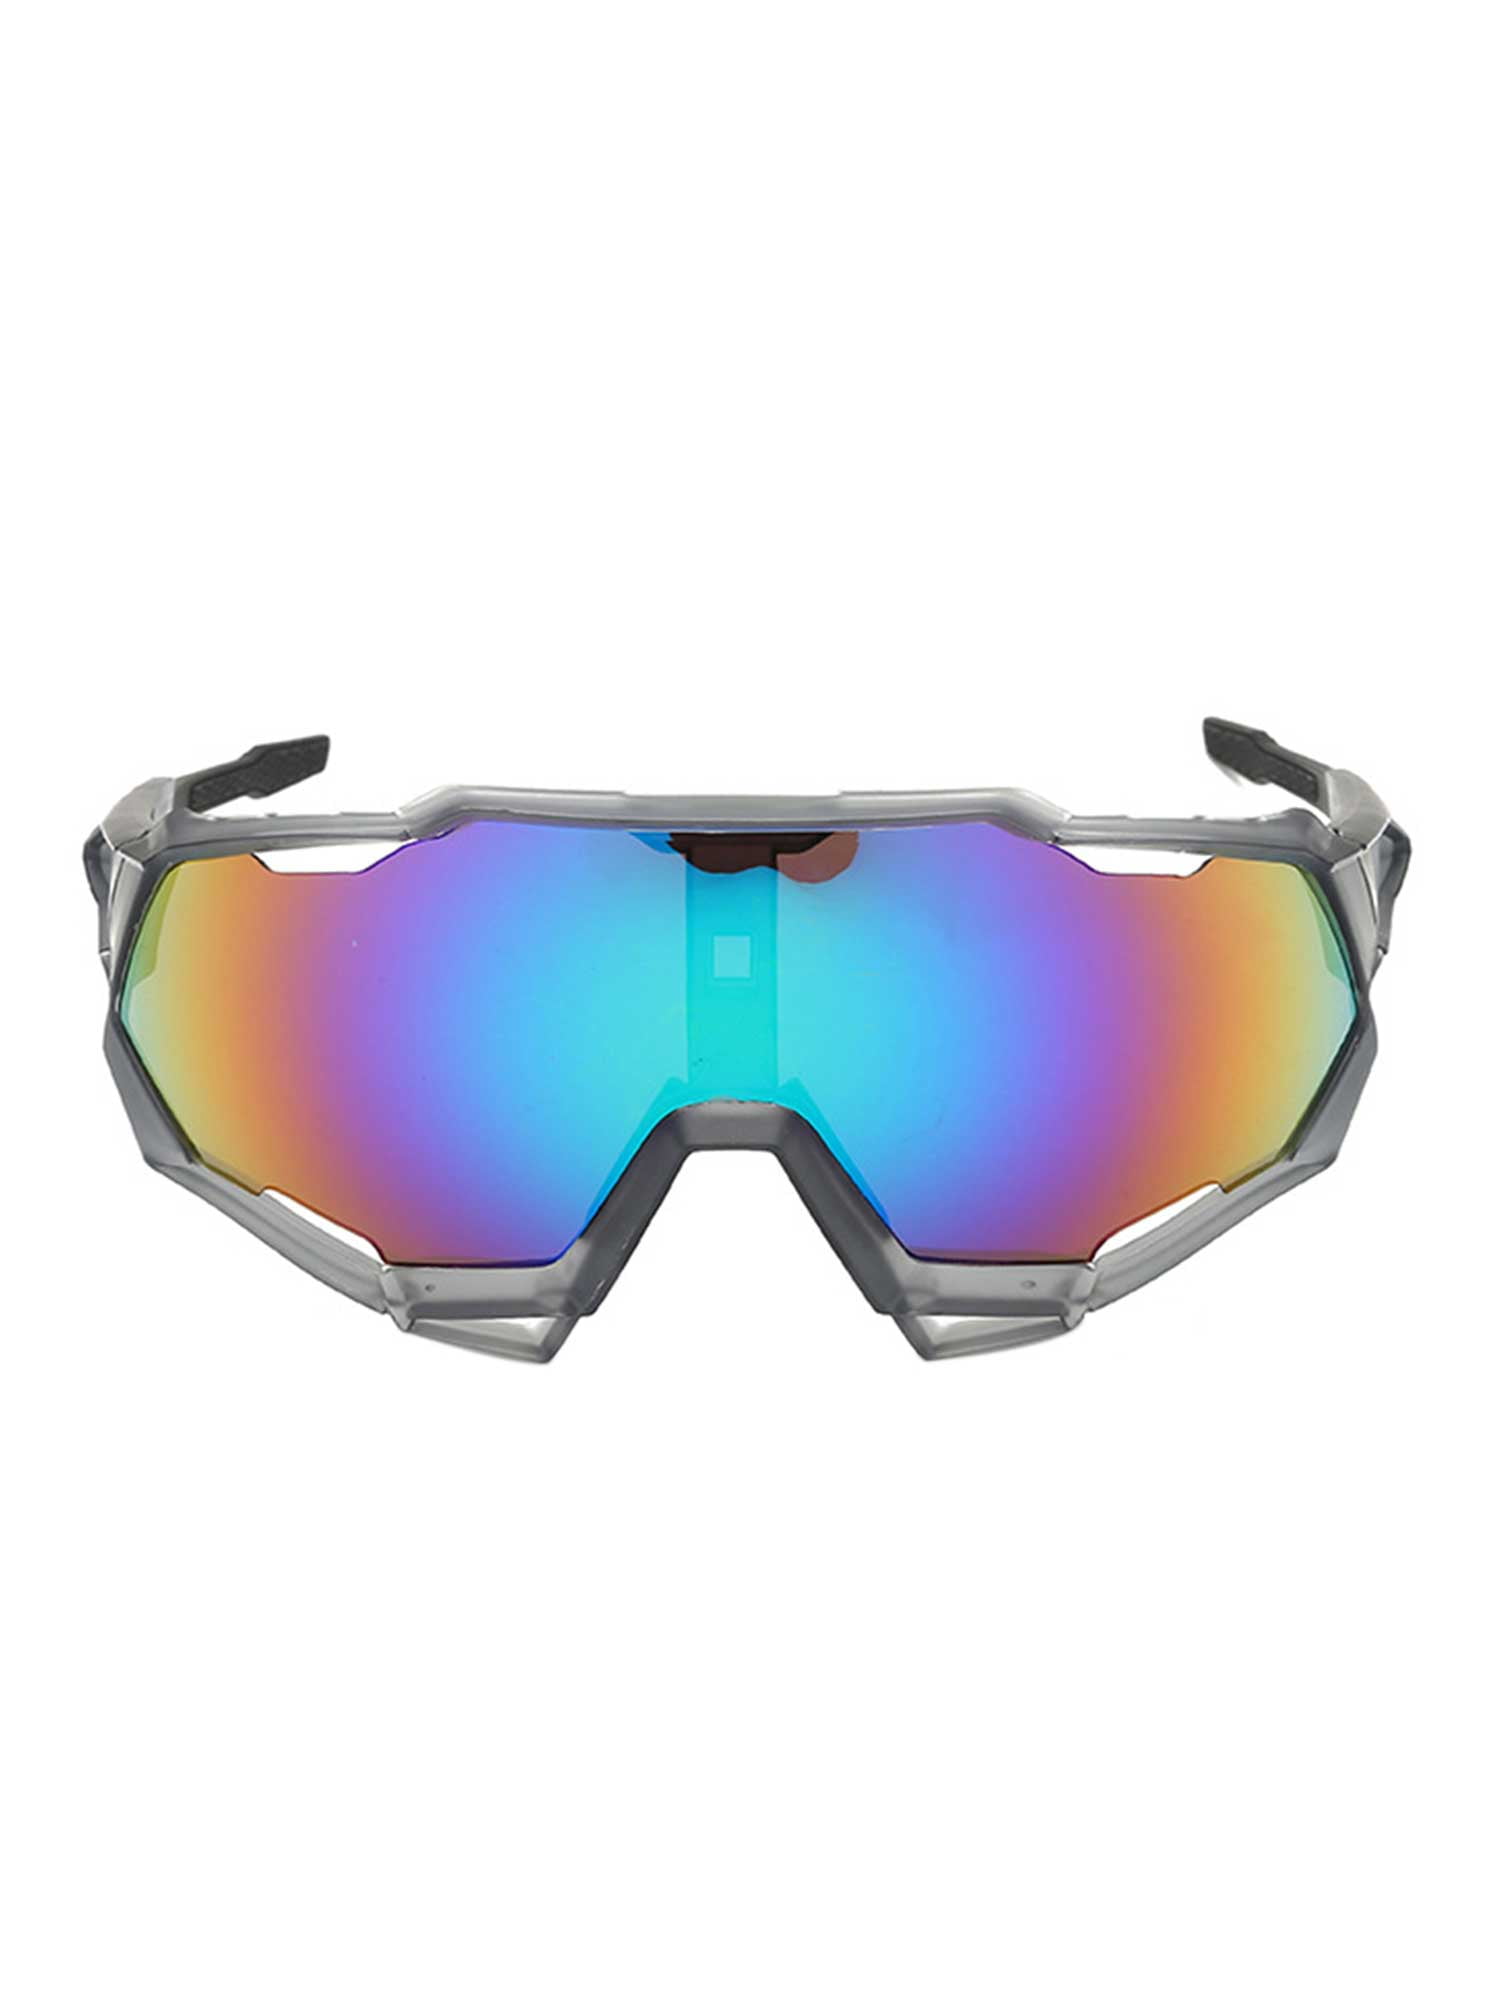 Outdoor sports Sunglasses Cycling Glasses Sunglasses Bicycle glasses Polarized 